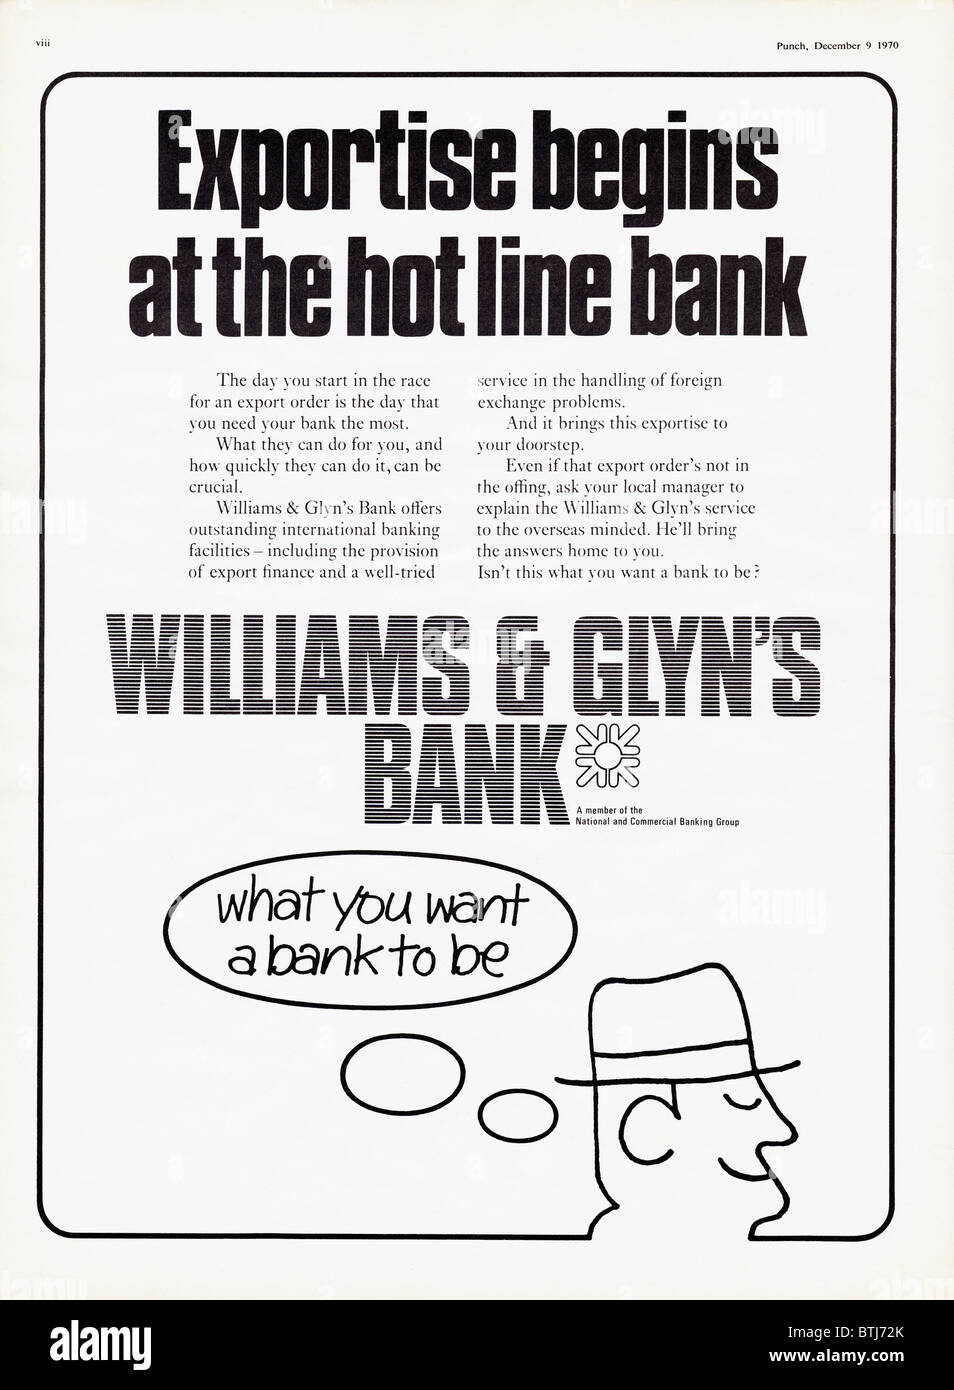 Advertising for Williams & Glyn's Bank in magazine circa 1970 Stock Photo